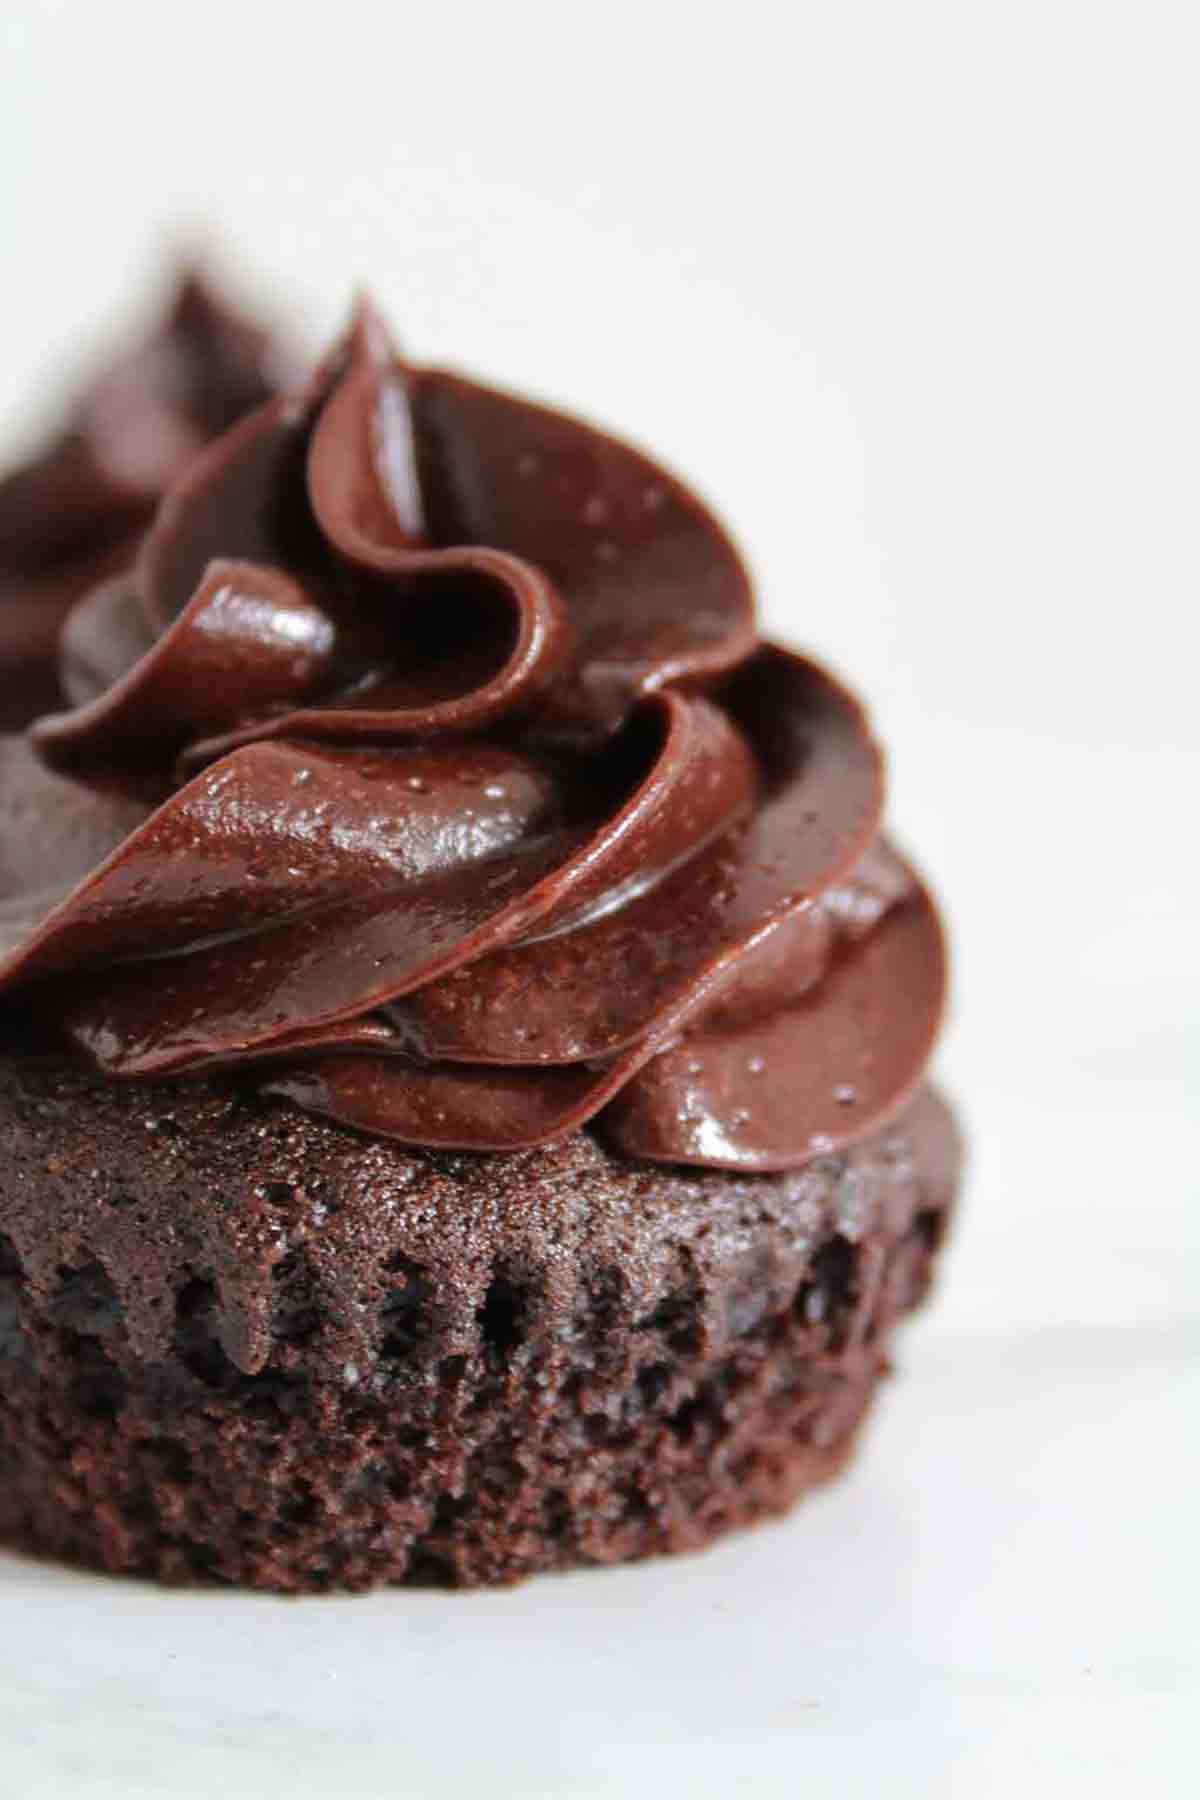 Vegan cupcake with Betty Crocker chocolate frosting on top